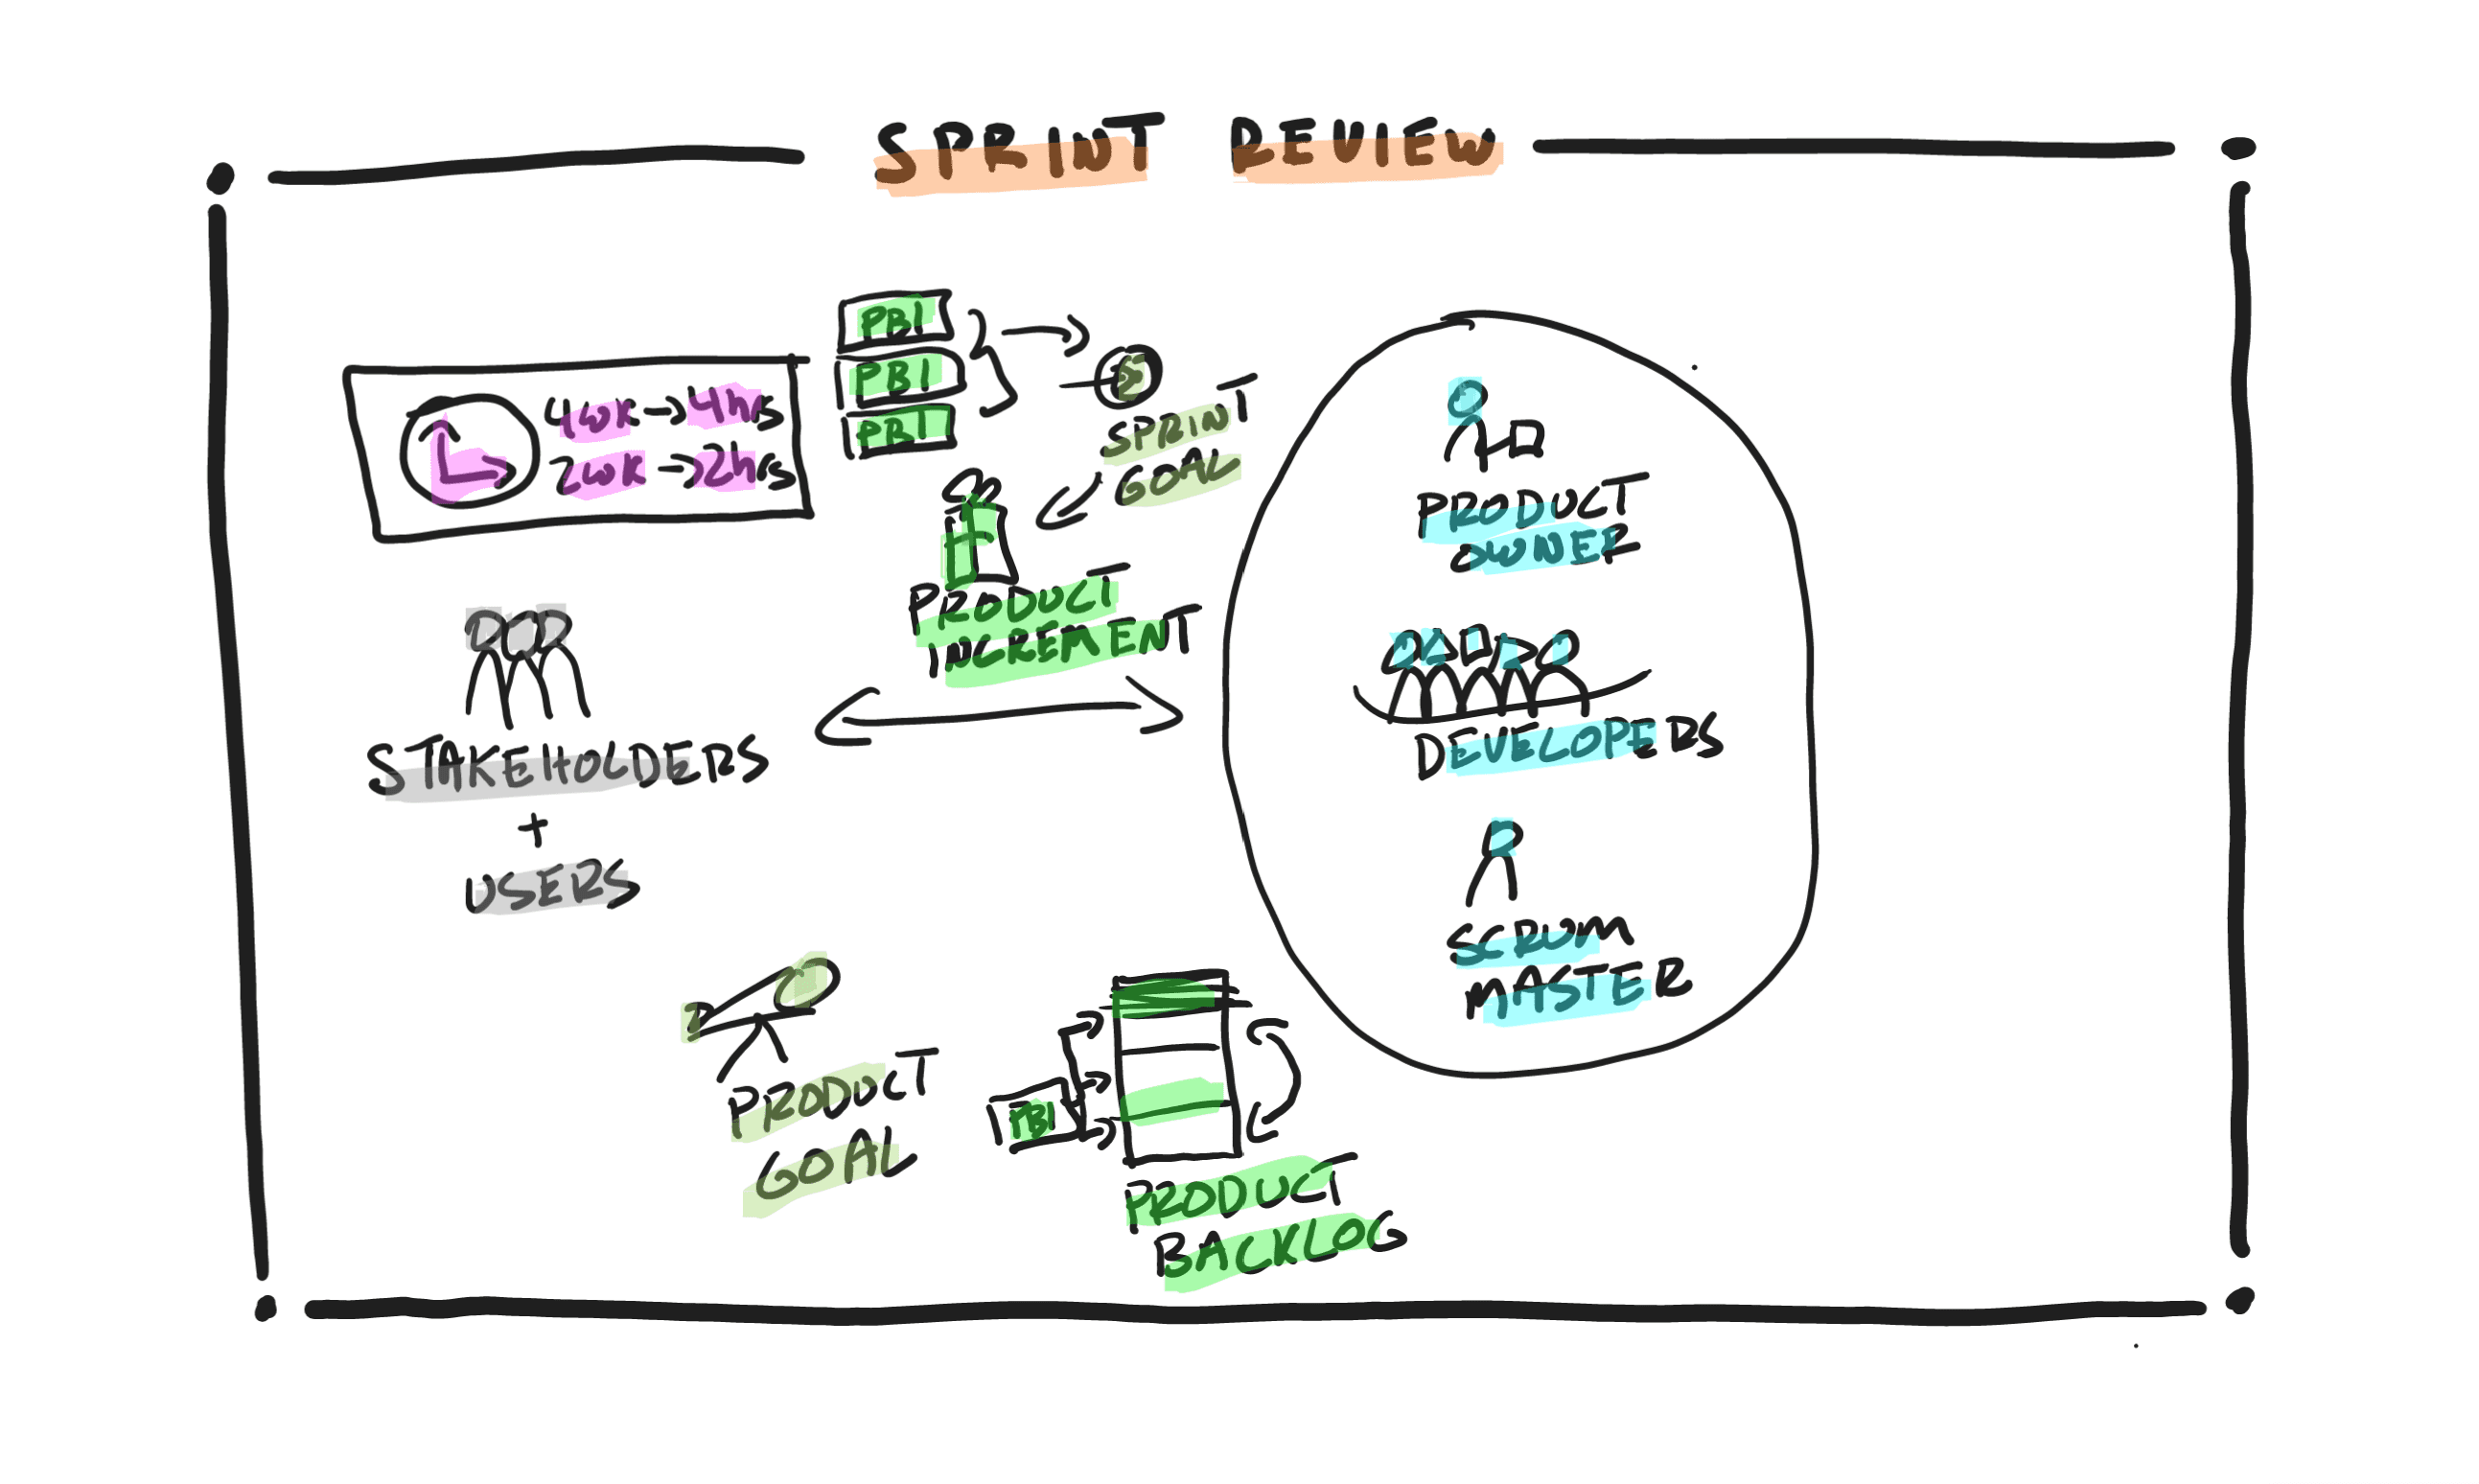 Sprint Review in a Nutshell